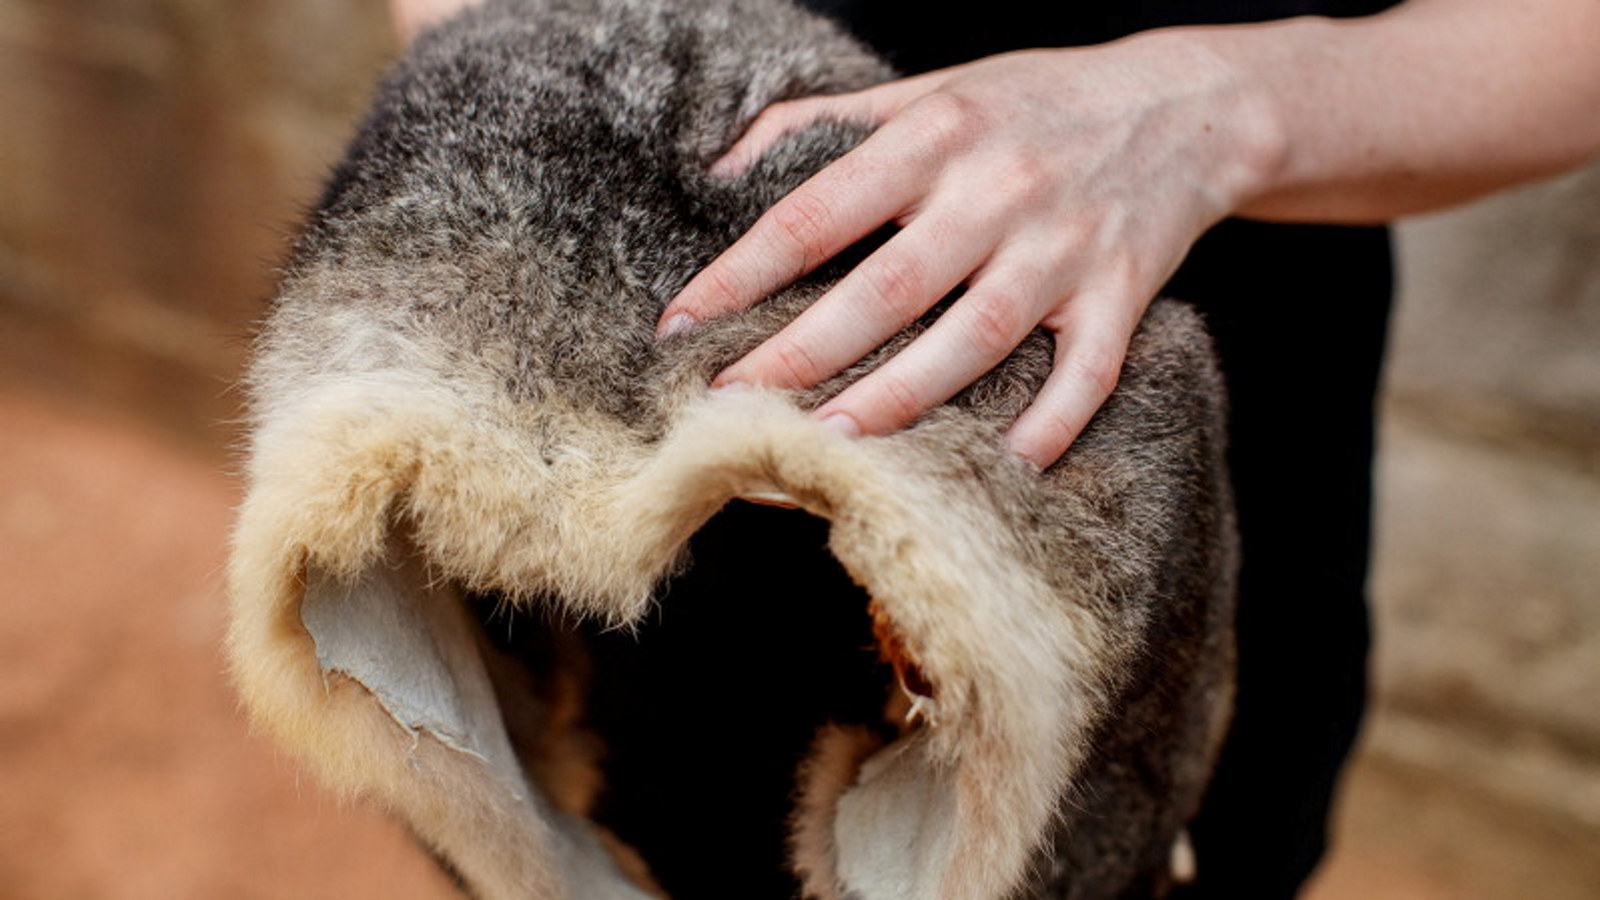 Closeup of furry skin being held by person's hands.